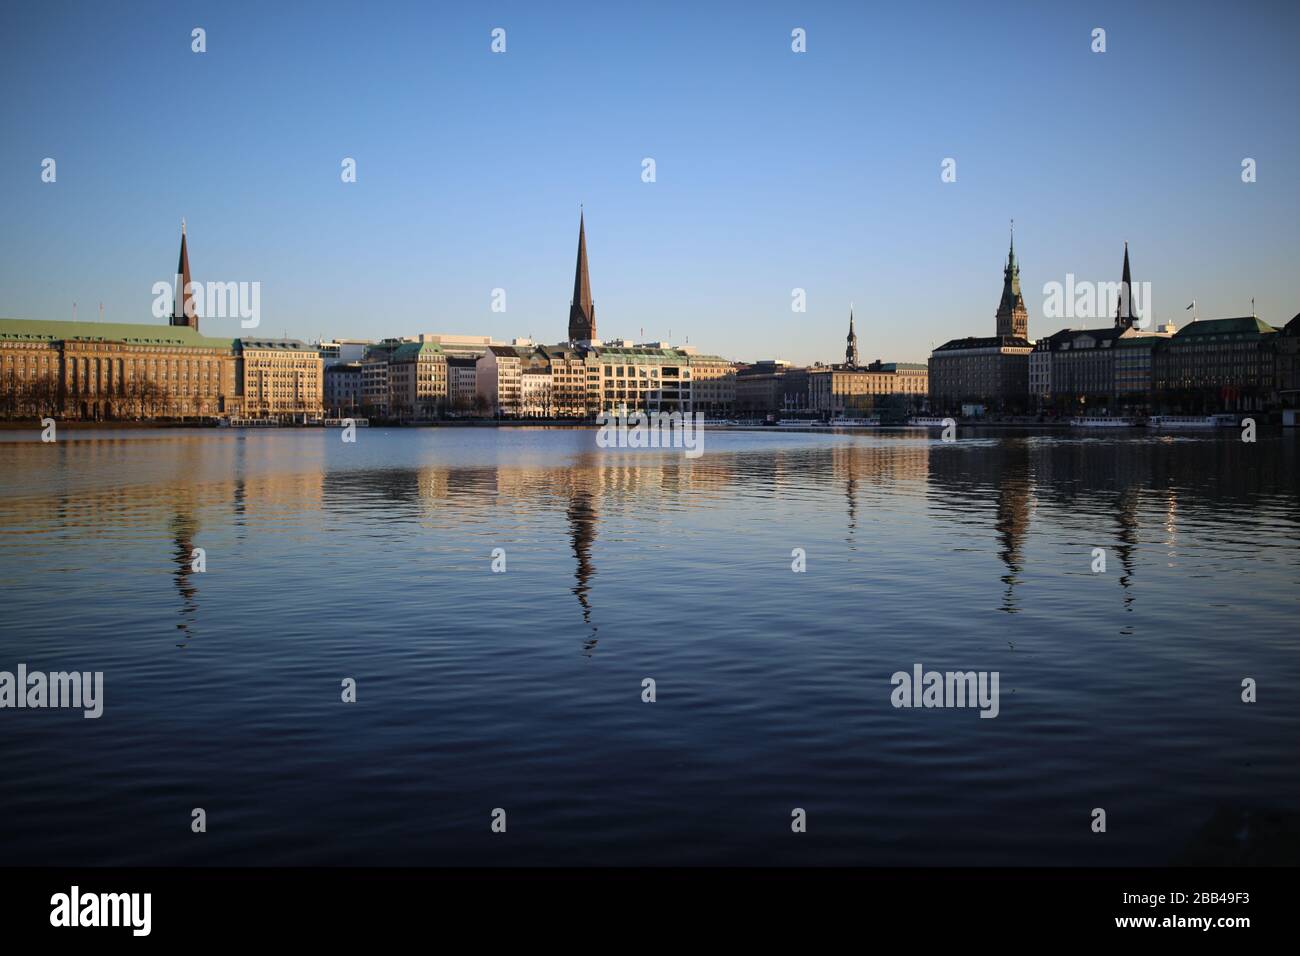 The Binnenalster Lake, Or The Inner Alster Lake, In Hamburg, Germany, with the Jungfernstieg and Rathaus In The Background Stock Photo